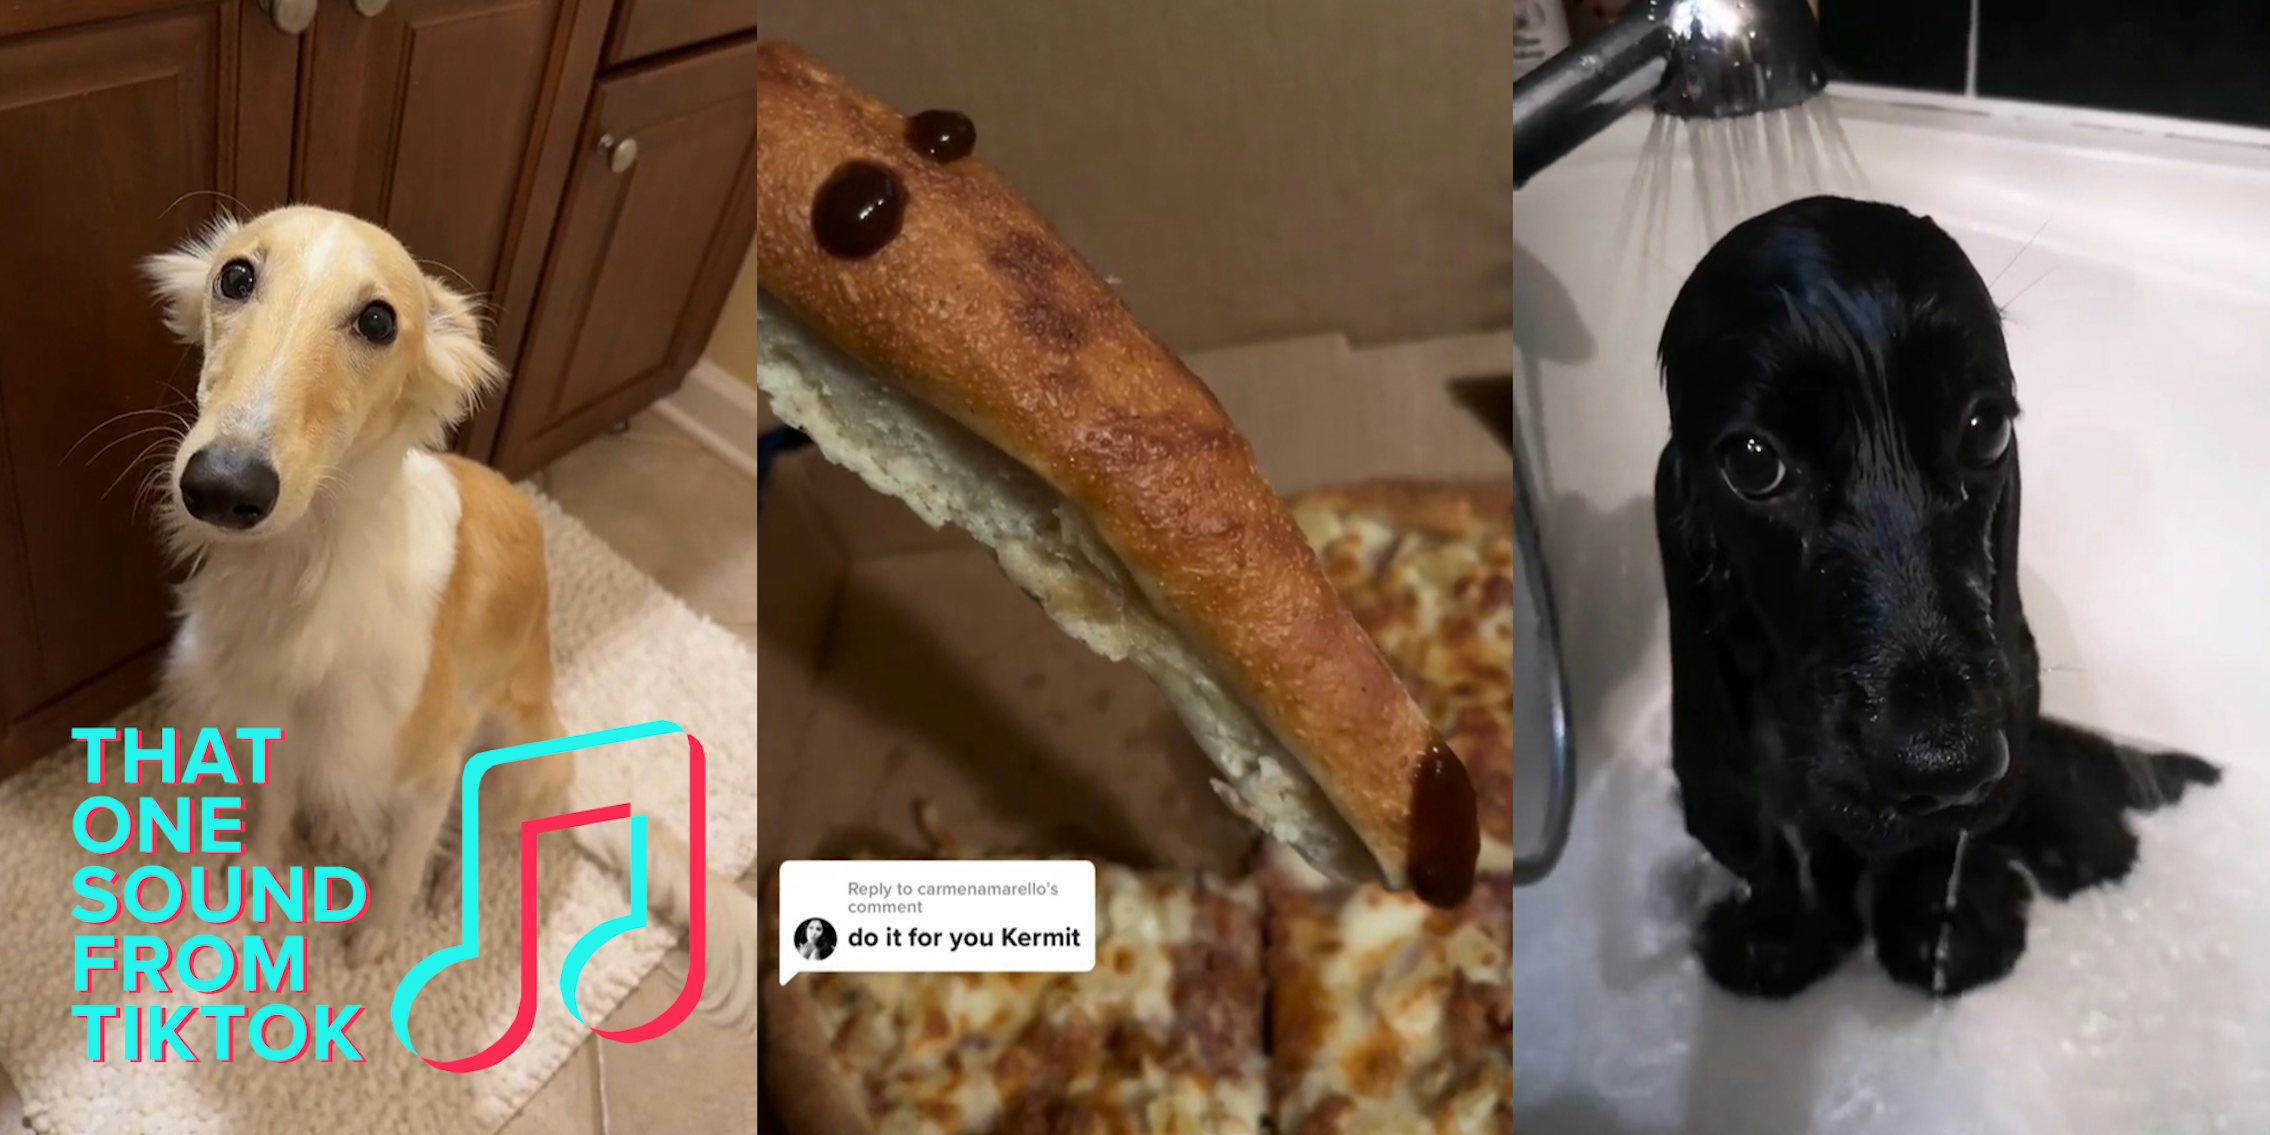 dog sitting on bathroom floor with That One Sound From TikTok logo (l) bread with sauce that looks like long face dog with caption 'do it for you Kermit' (c) sad dog in bathtub with shower running (r)